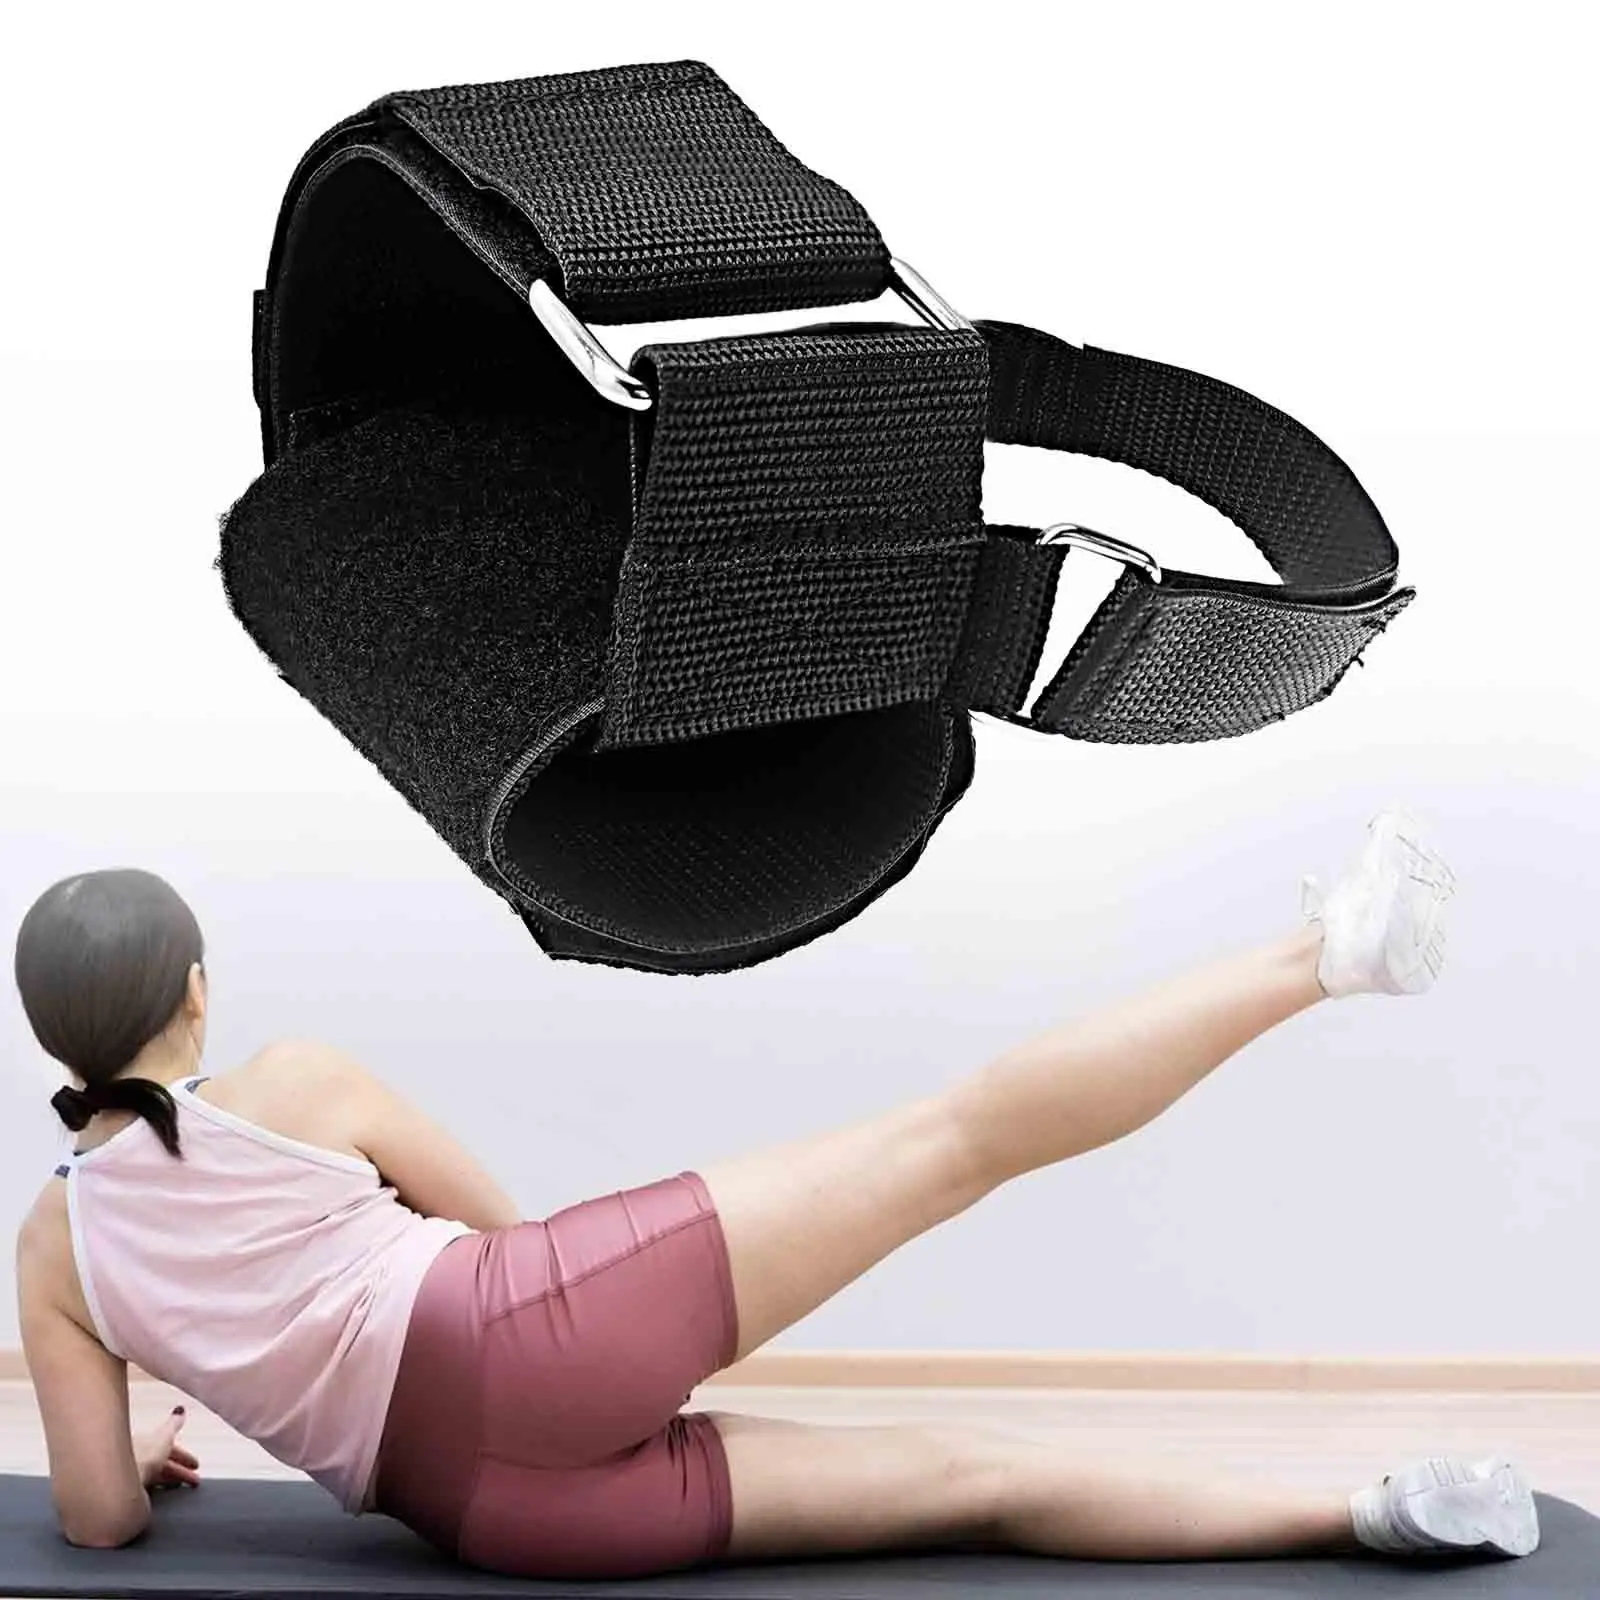 Dumbbell Foot Attachment Weight Lifting Legs Straps for Cable Machine Ankle Weight Strap Dumbbell Ankle Strap Tibialis Trainer